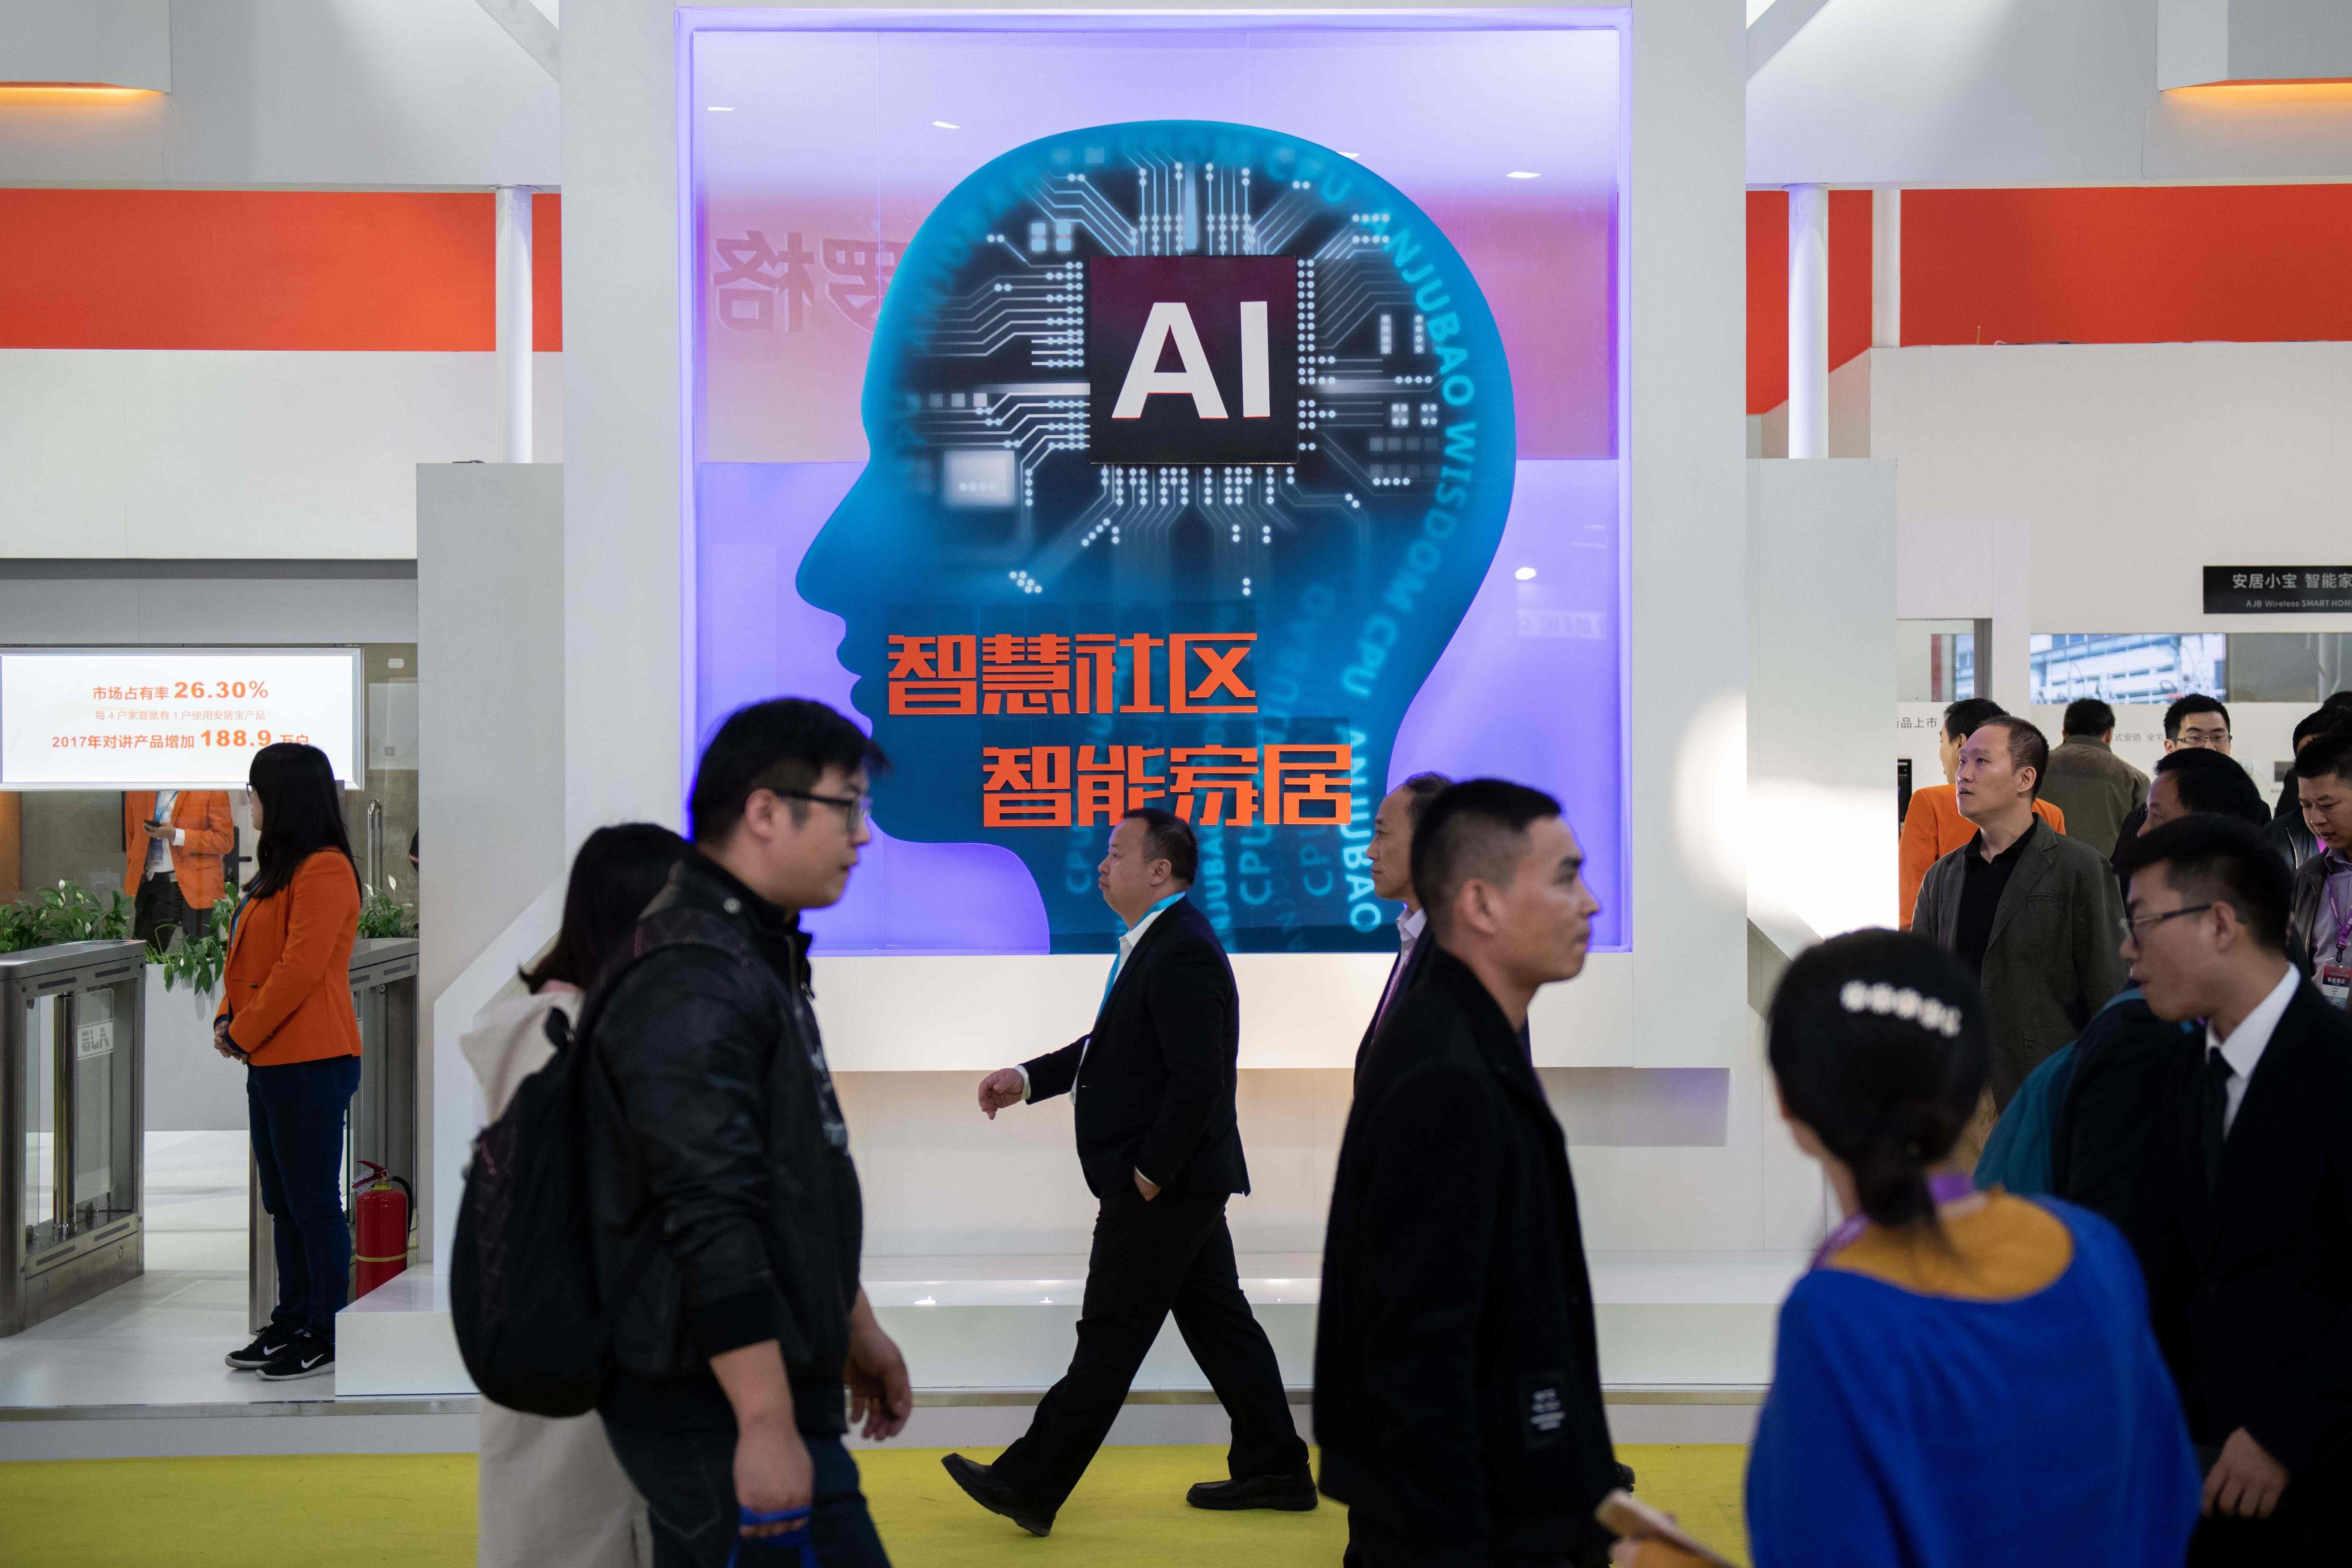 Chinese President Xi Jinping says China must develop, control and use artificial intelligence to secure the country’s future. Photo: AFP